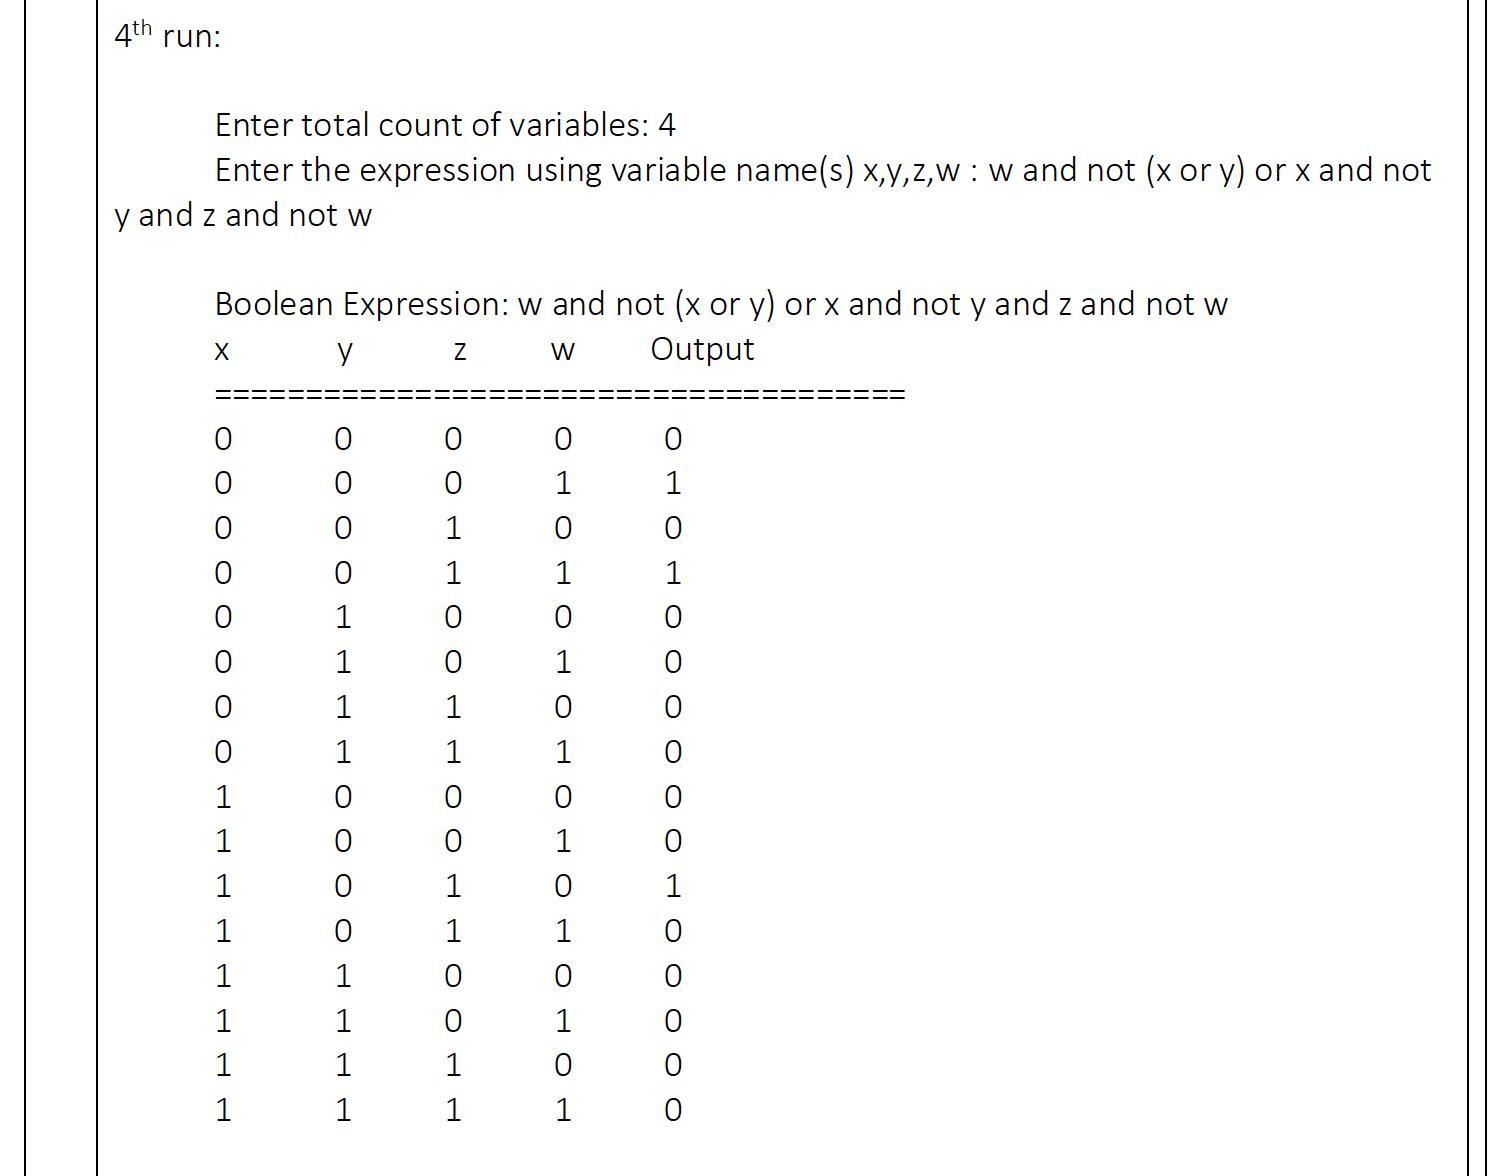 4th run: Enter total count of variables: 4 Enter the expression using variable name(s) x,y,z,w: w and not (x